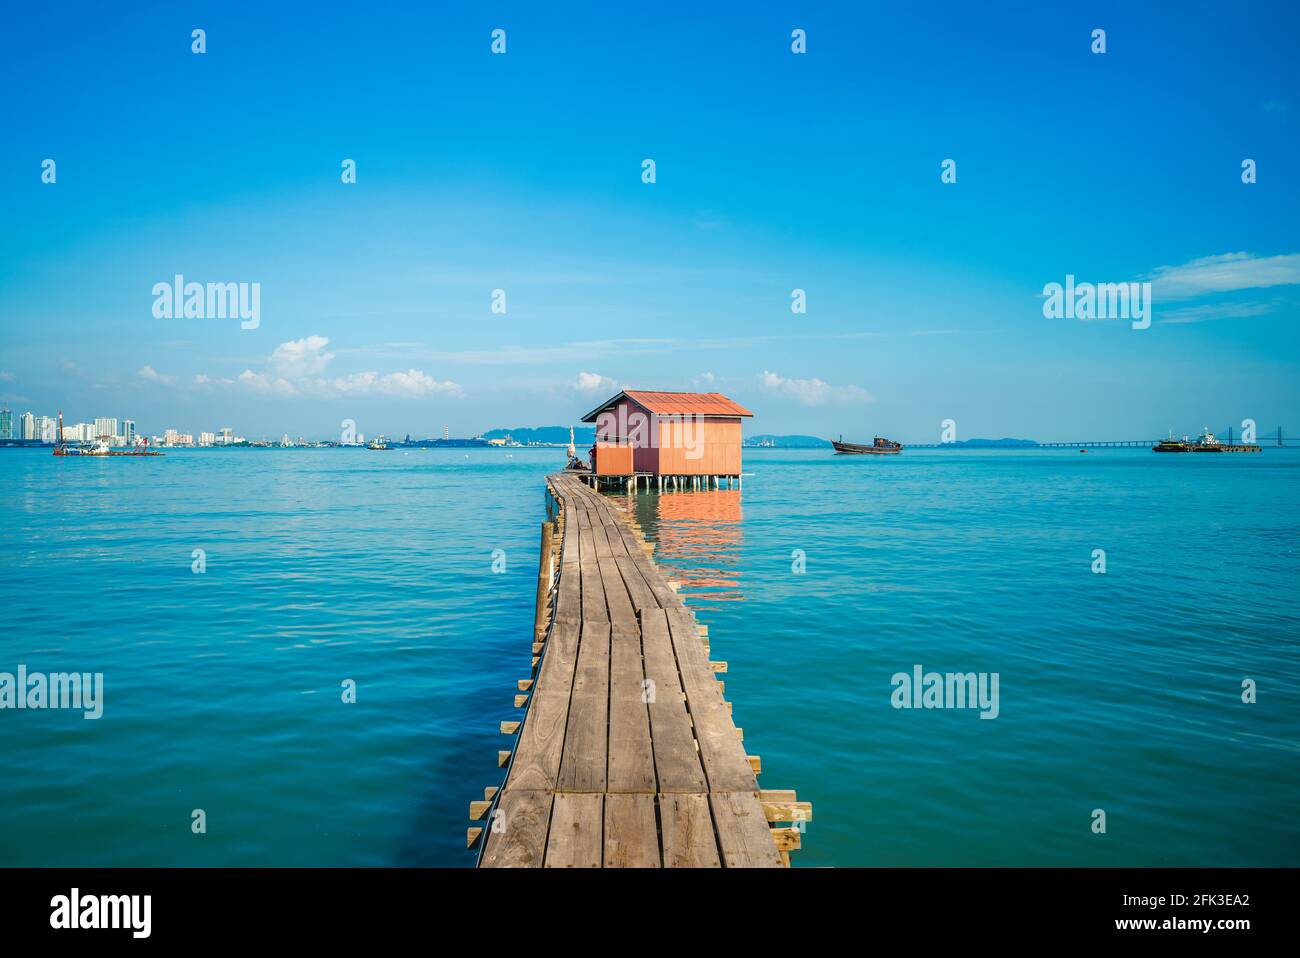 tan jetty, one of clan jetties at george city, penang, malaysia Stock Photo